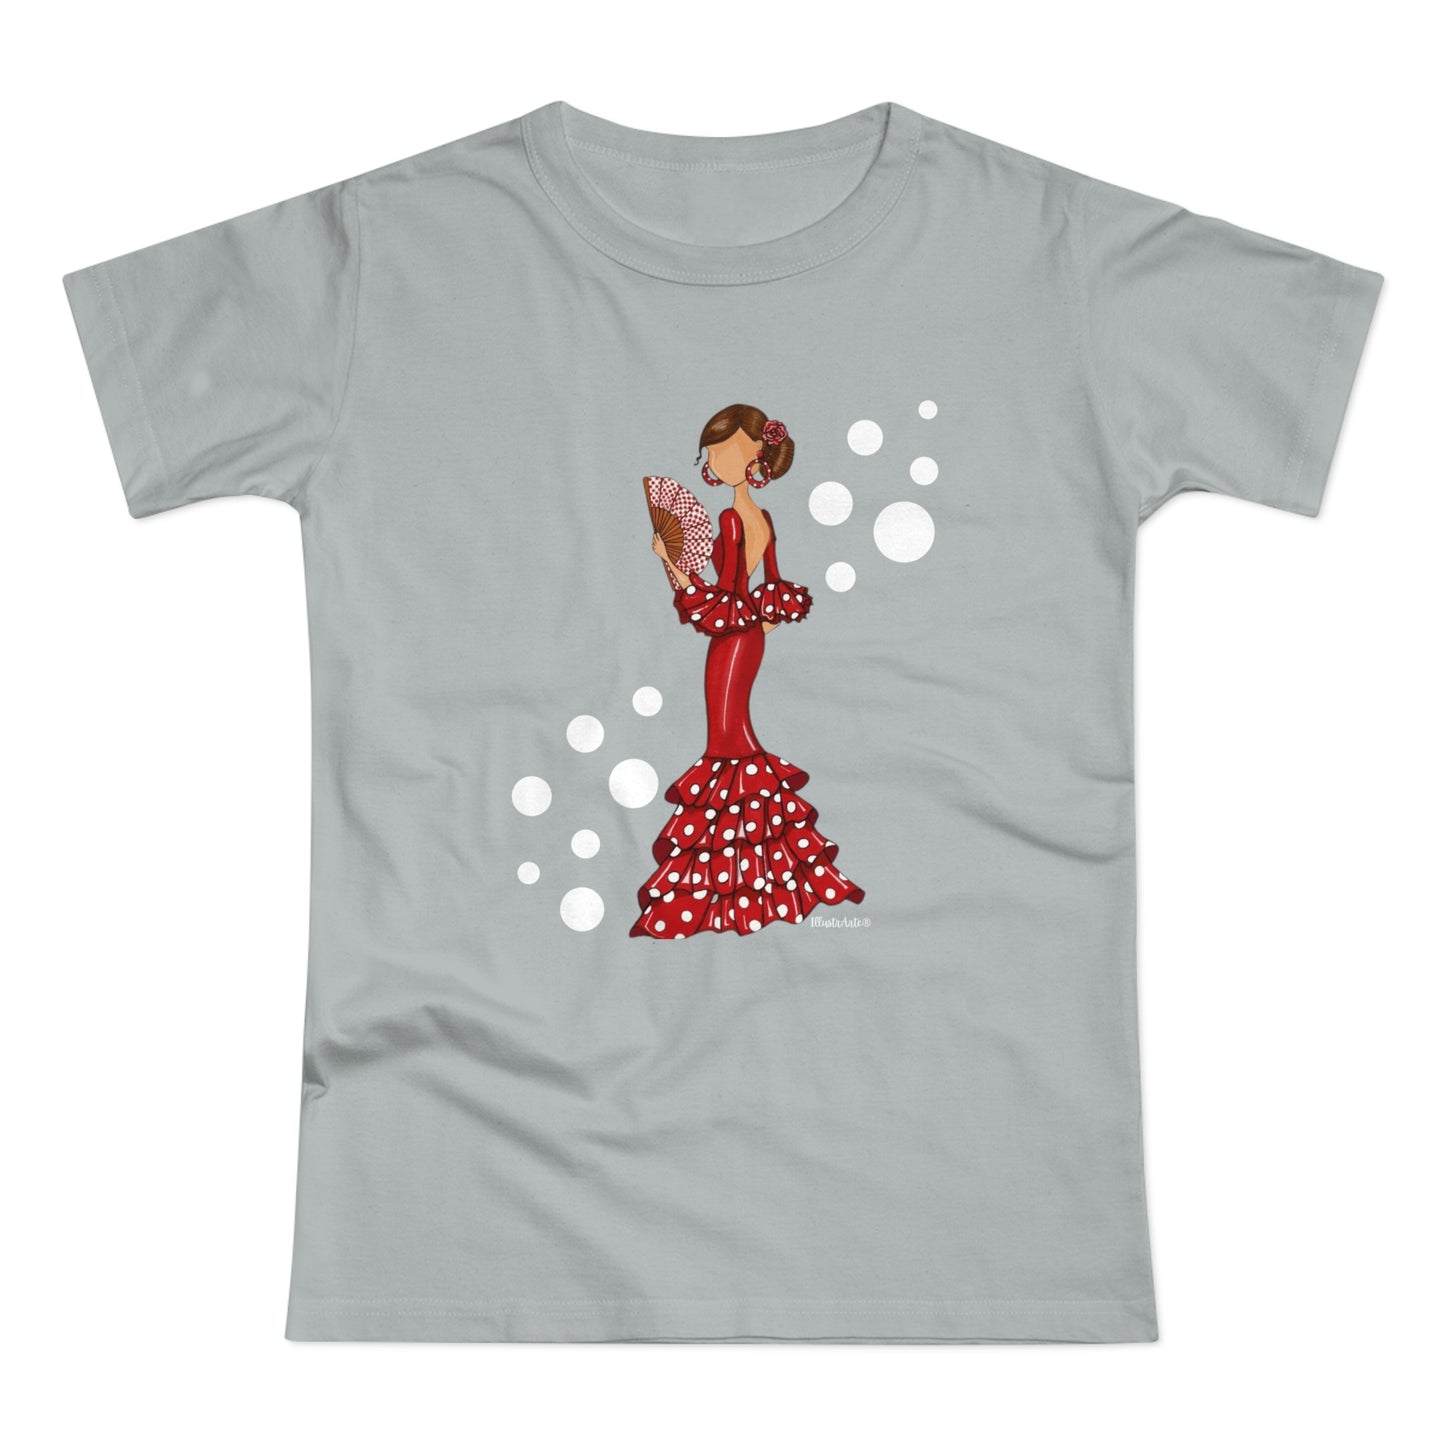 a t - shirt with a woman in a red dress reading a book